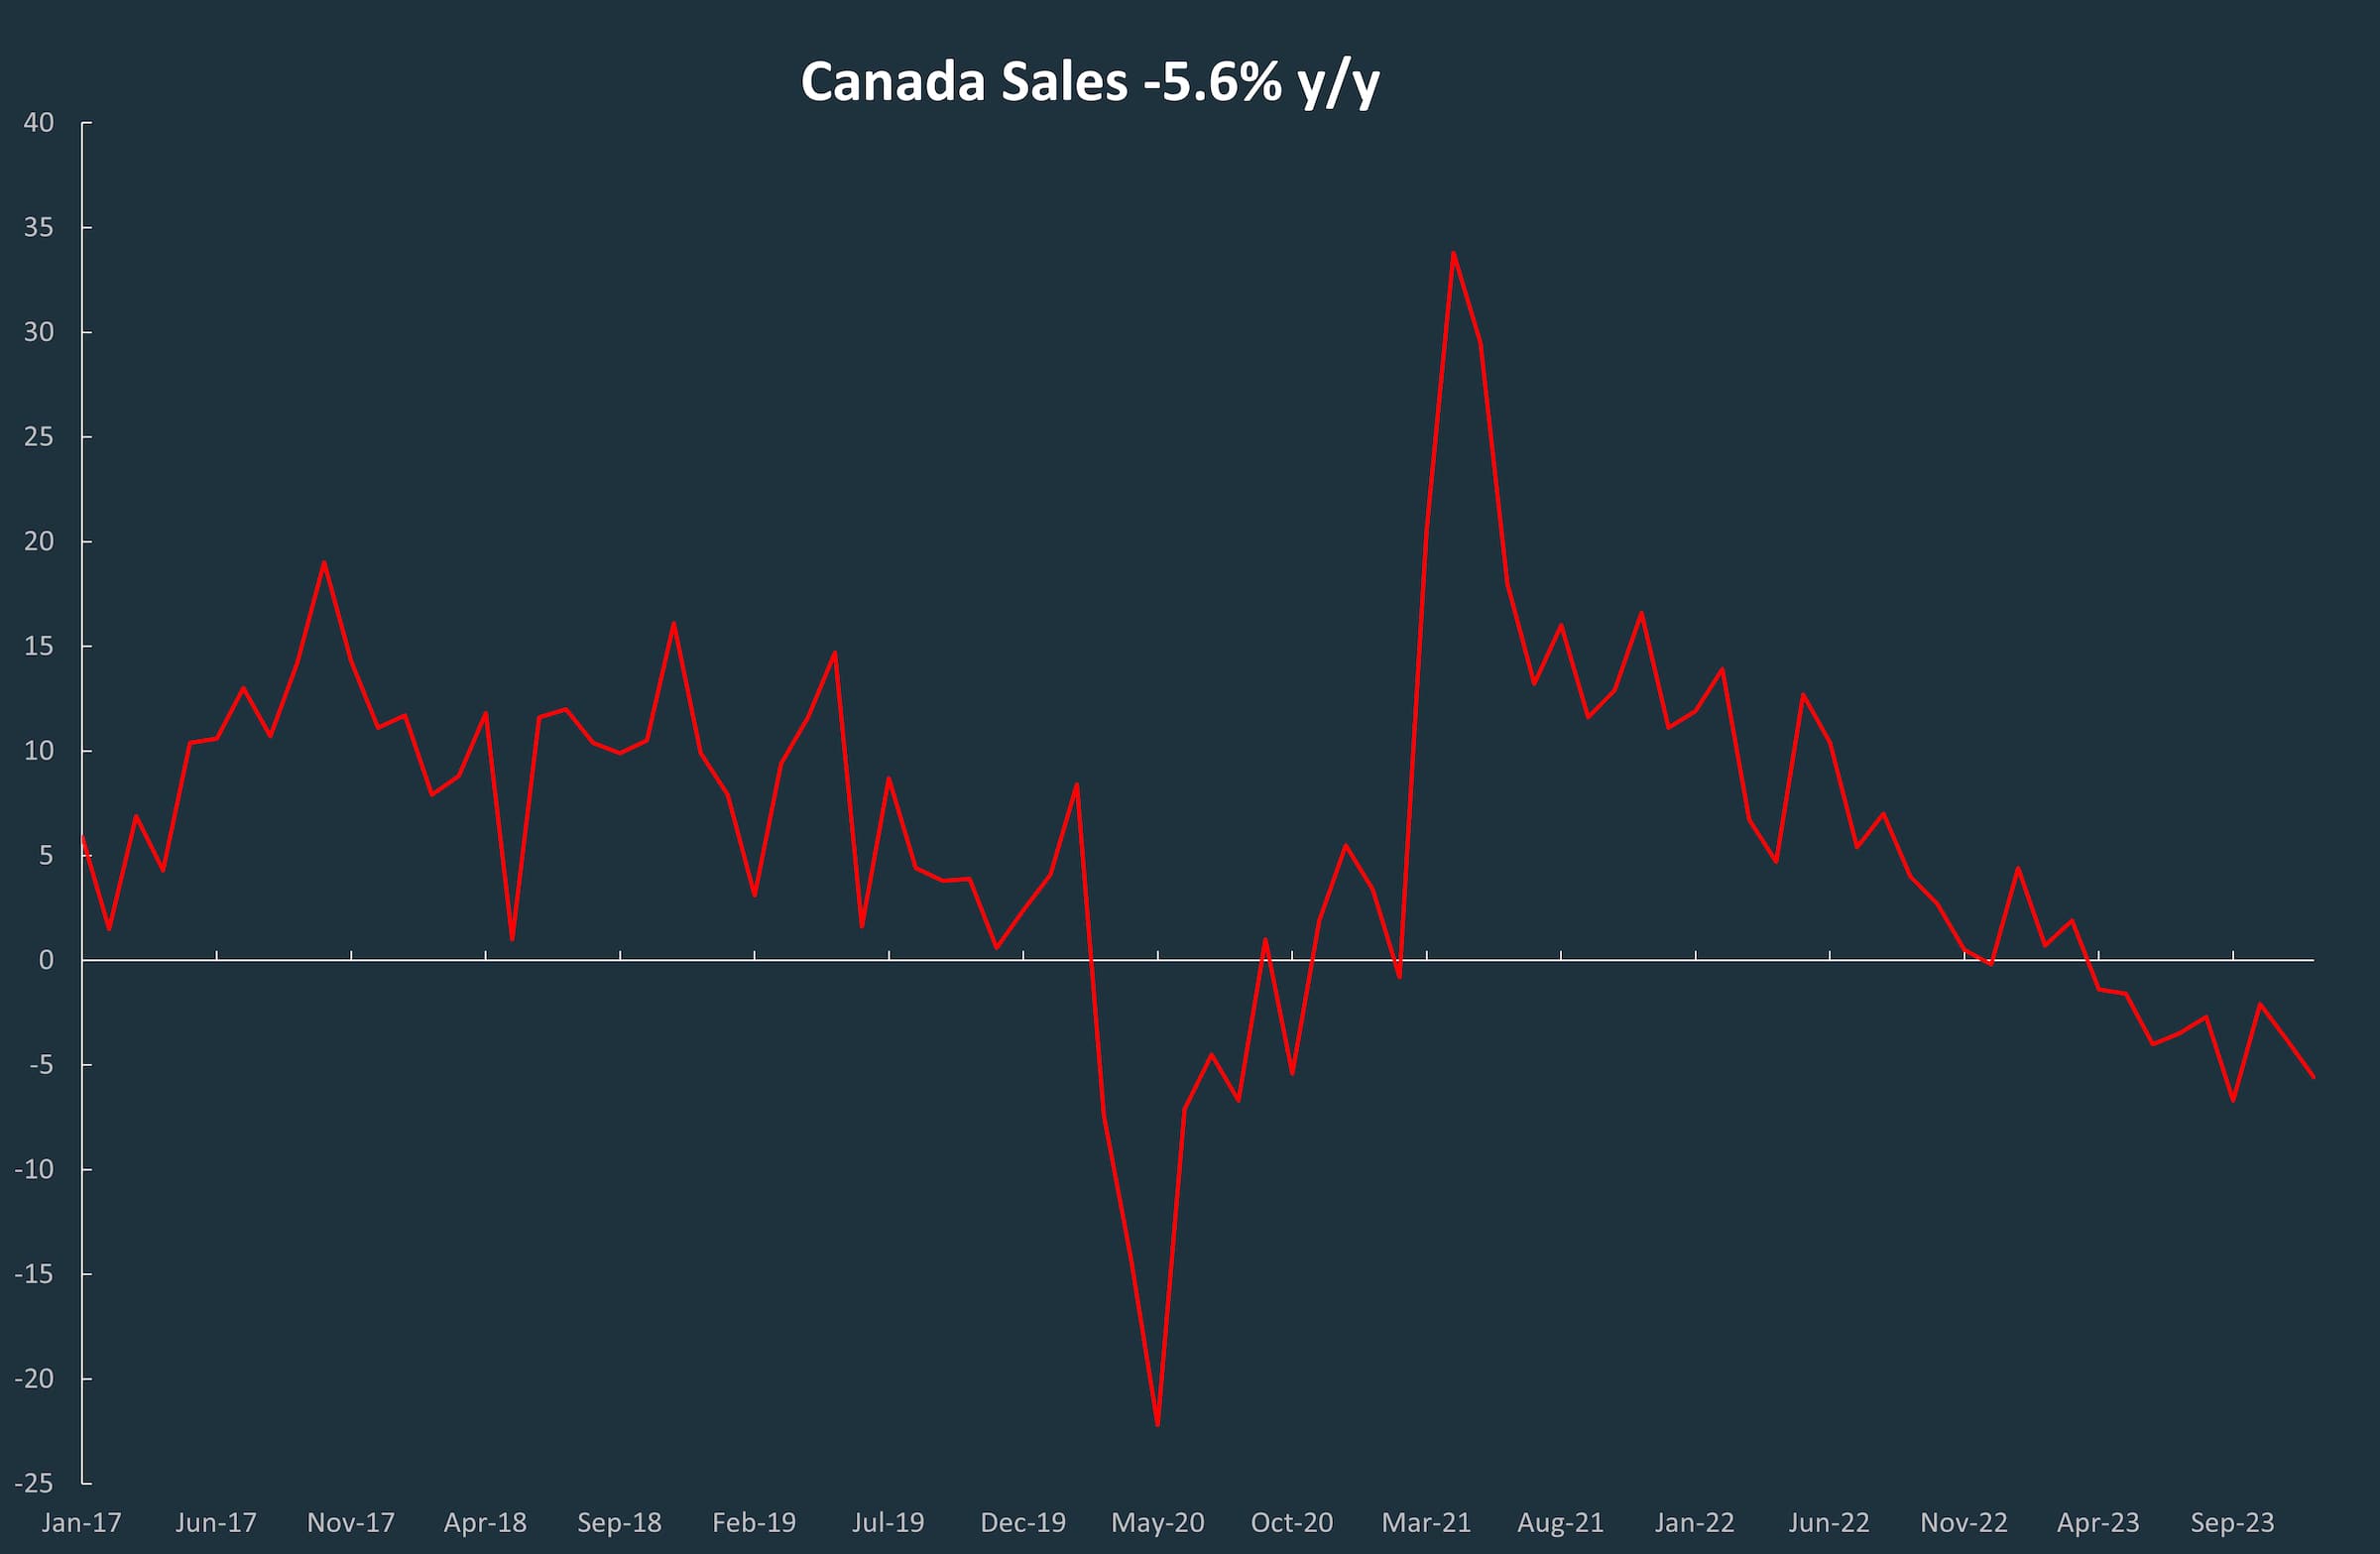 A line graph showing the ups and downs in the Canada Small Business sales since January 2017.